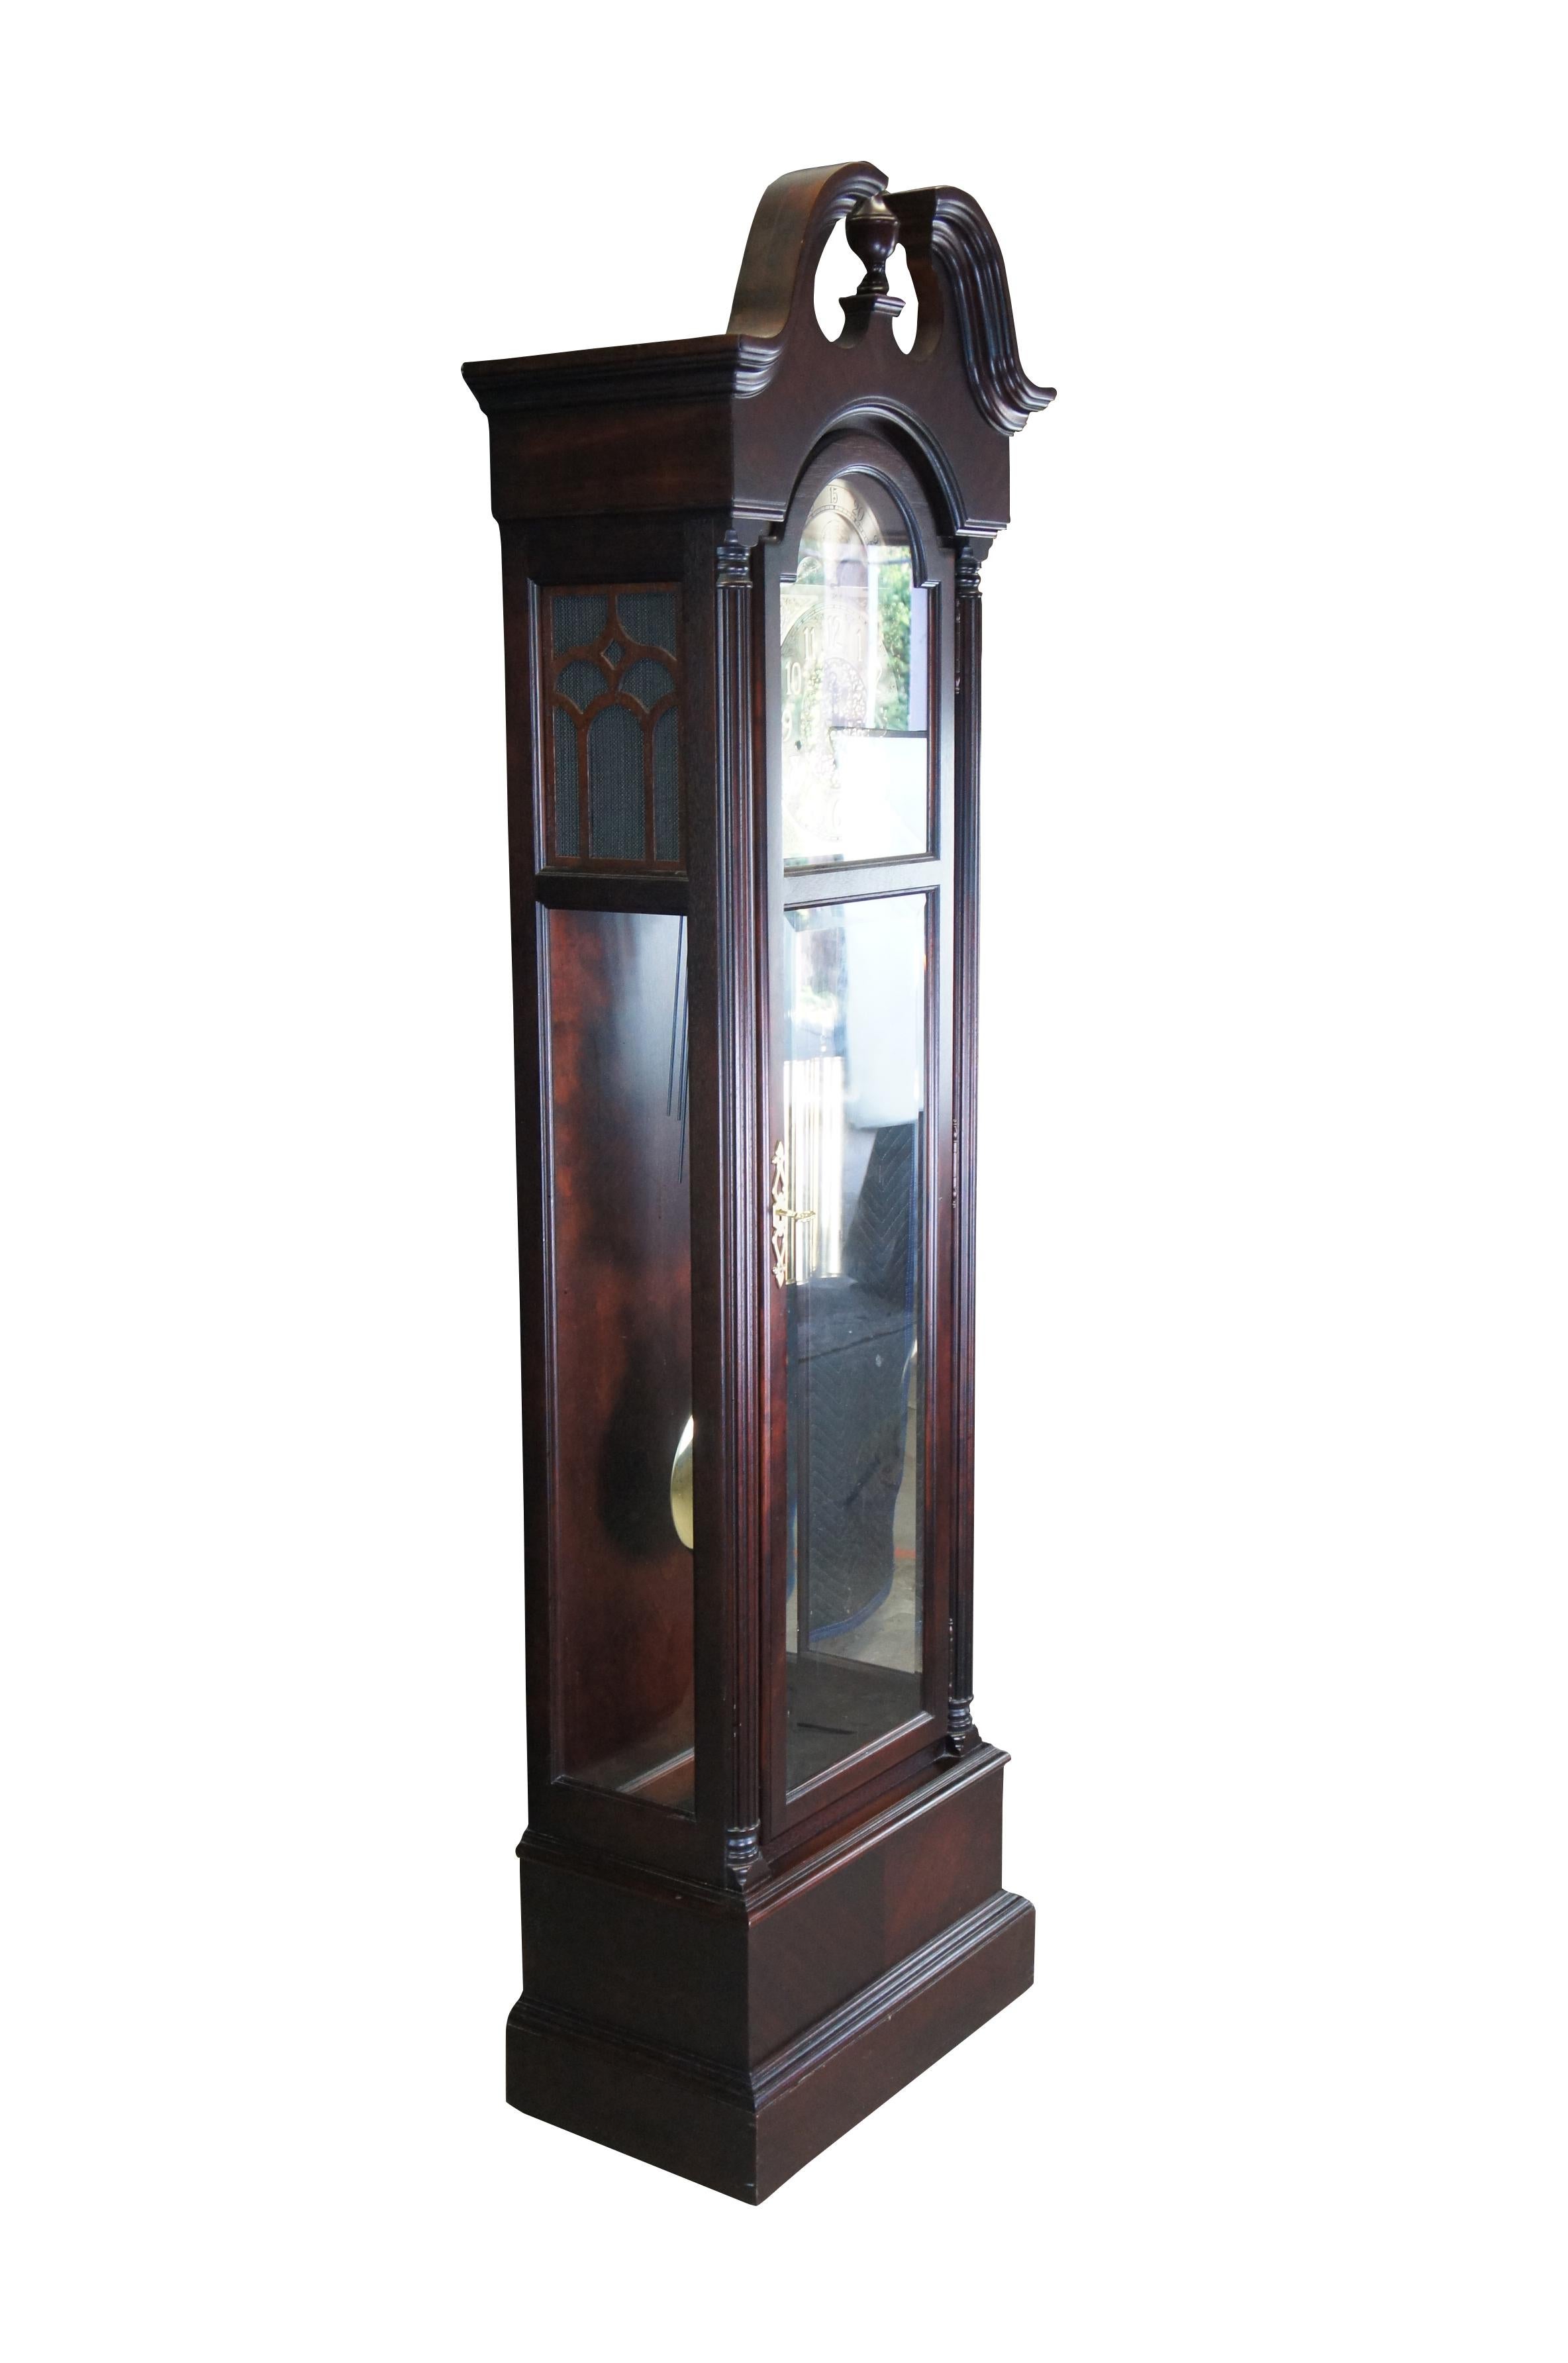 Late 20th century Howard Miller Grandfather Clock, serial number 609519.  Features a tall case made from mahogany with quarter cut reeded columns and an open pediment with central finial. Includes 3 chime settings.  Face is metal with filigree